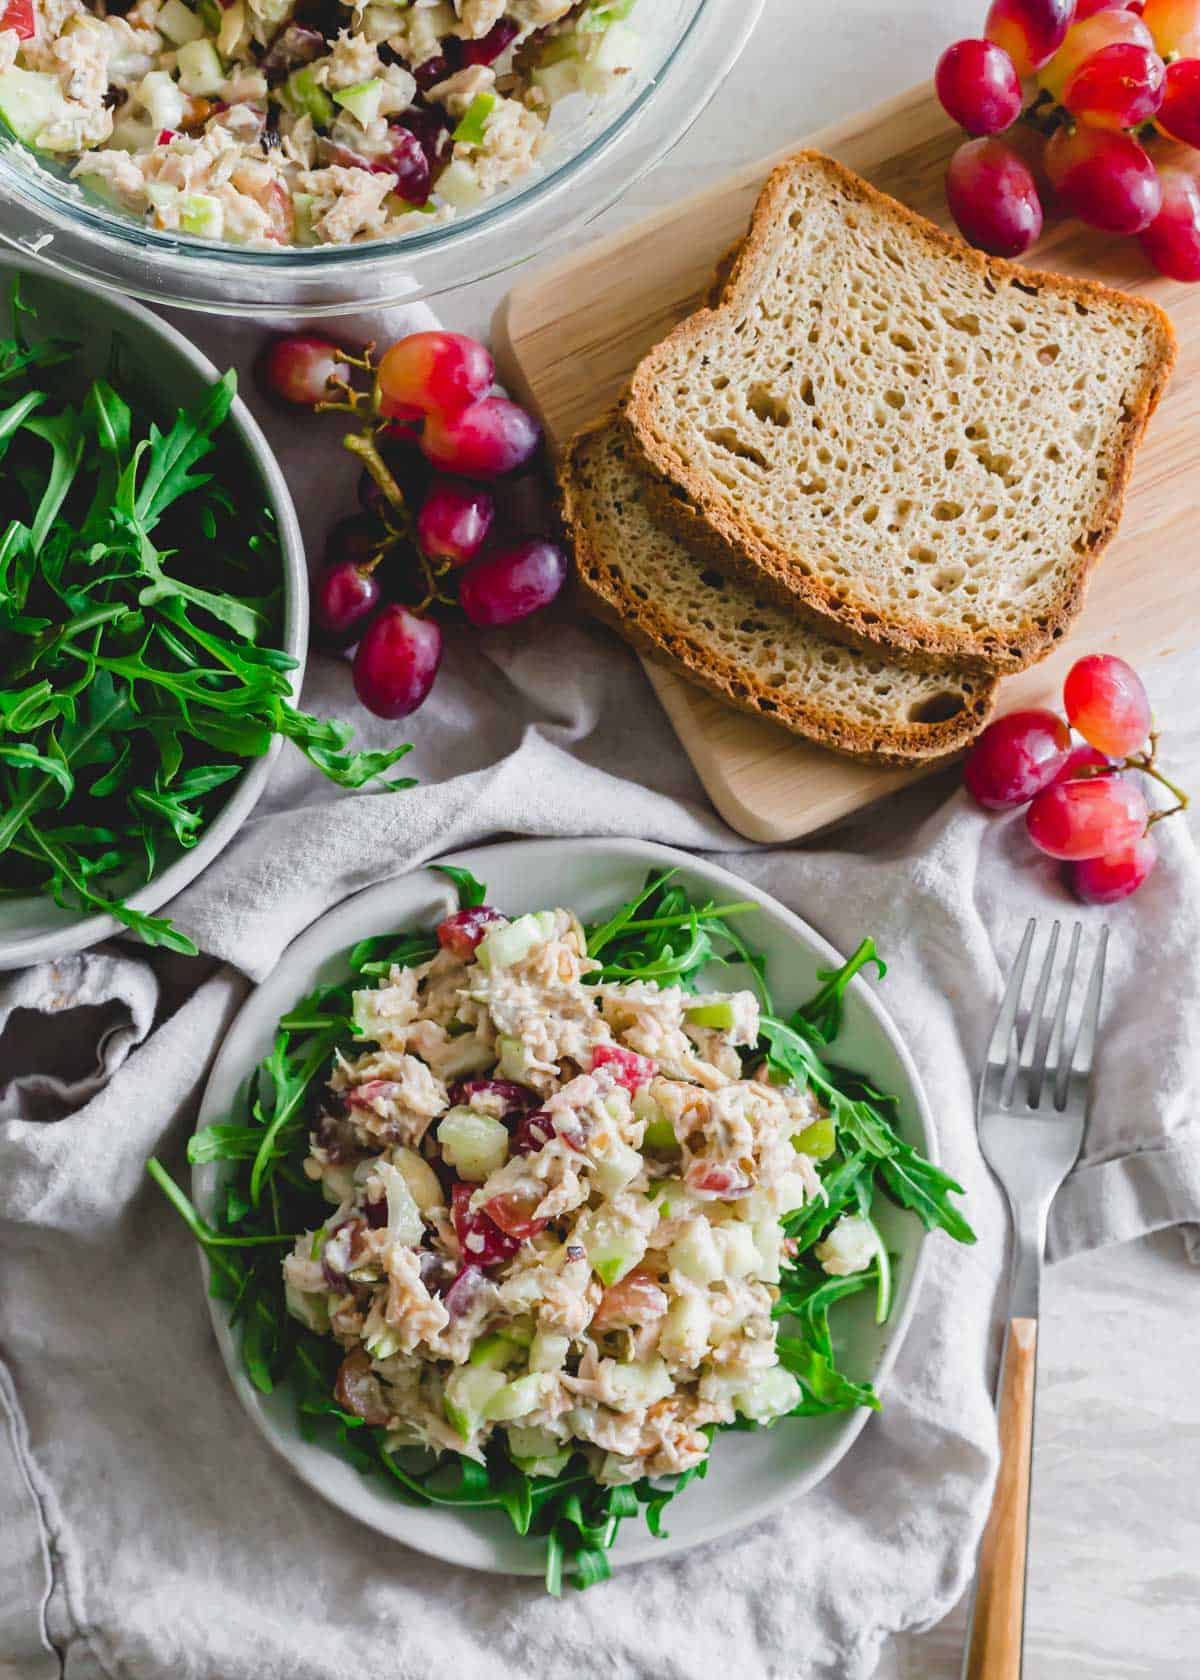 Healthier tuna salad recipe with grapes, celery, apples, walnuts and pepitas with yogurt on top of baby greens on a plate.